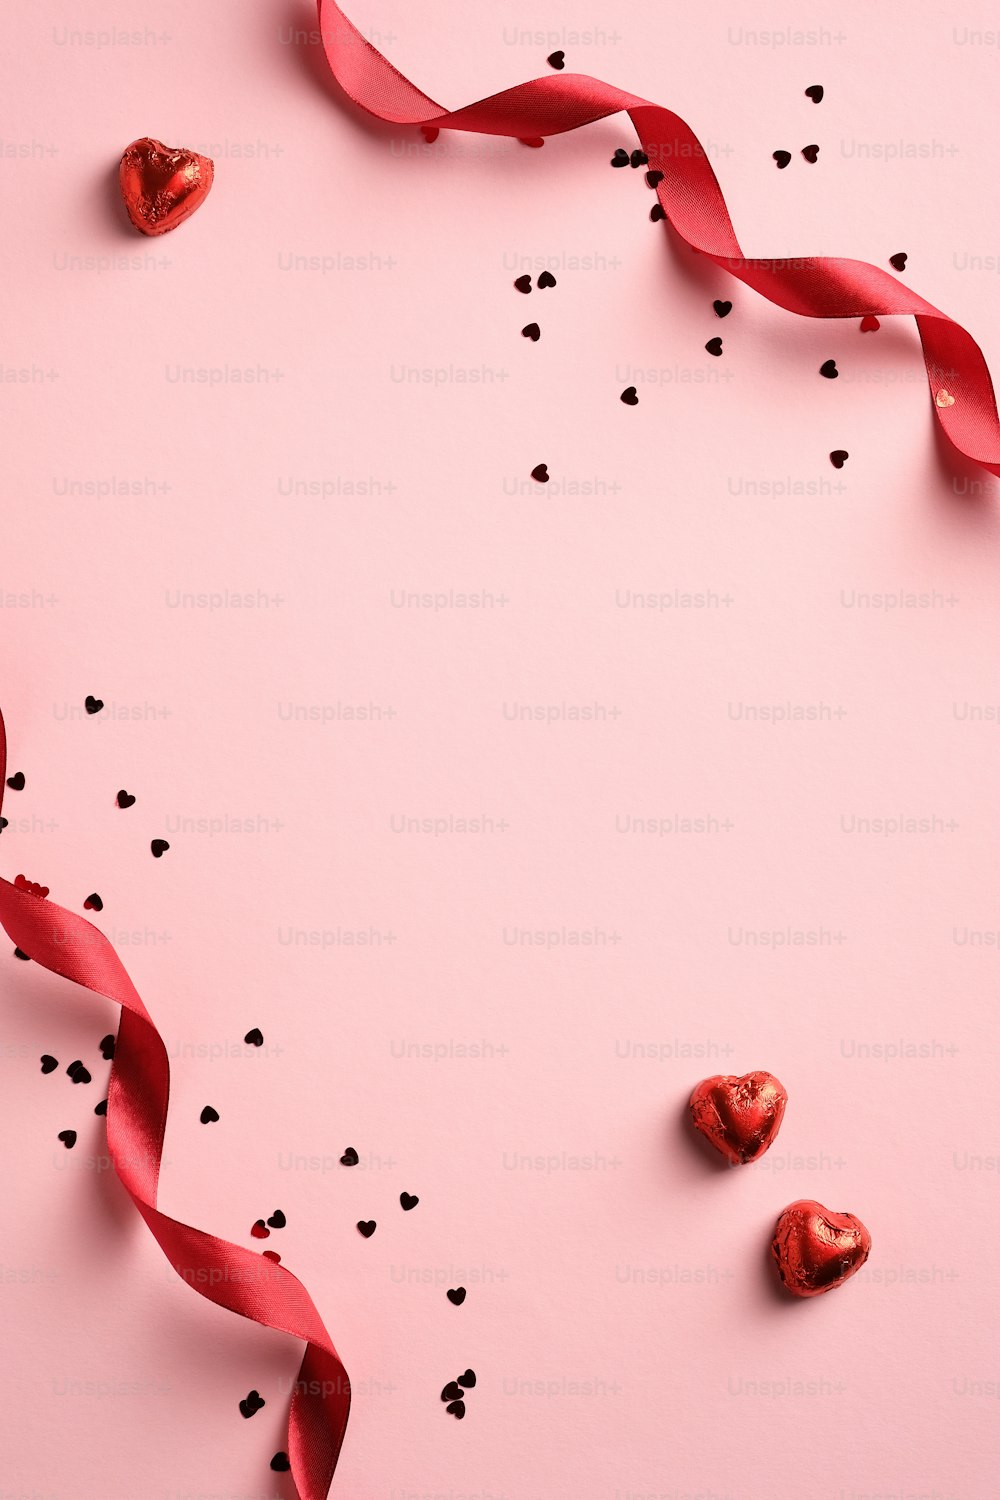 Pink Hearts Pictures  Download Free Images on Unsplash